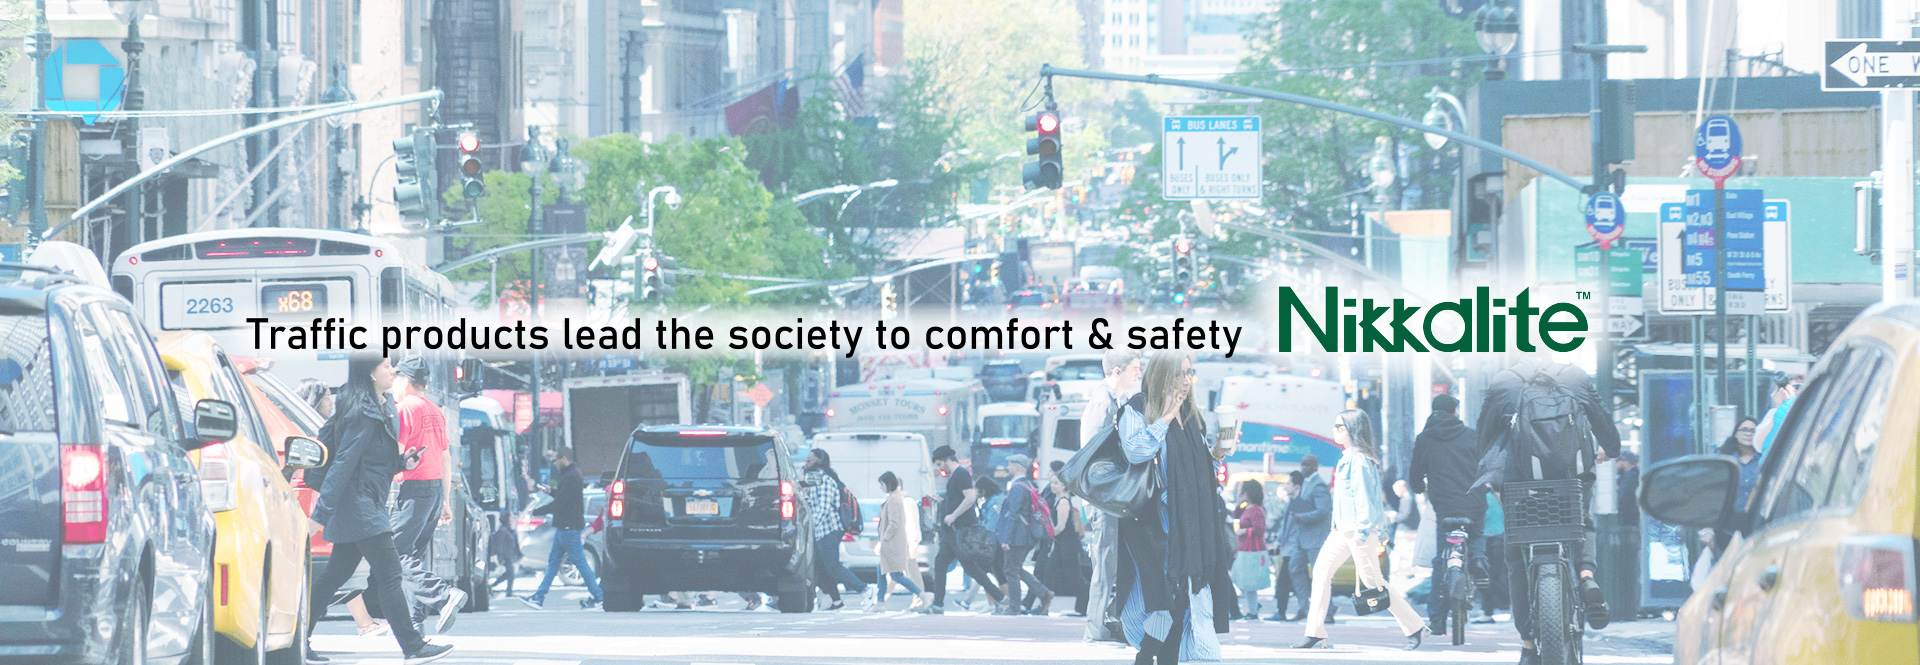 Traffic products lead the society to comfort & safety Nikkalite™